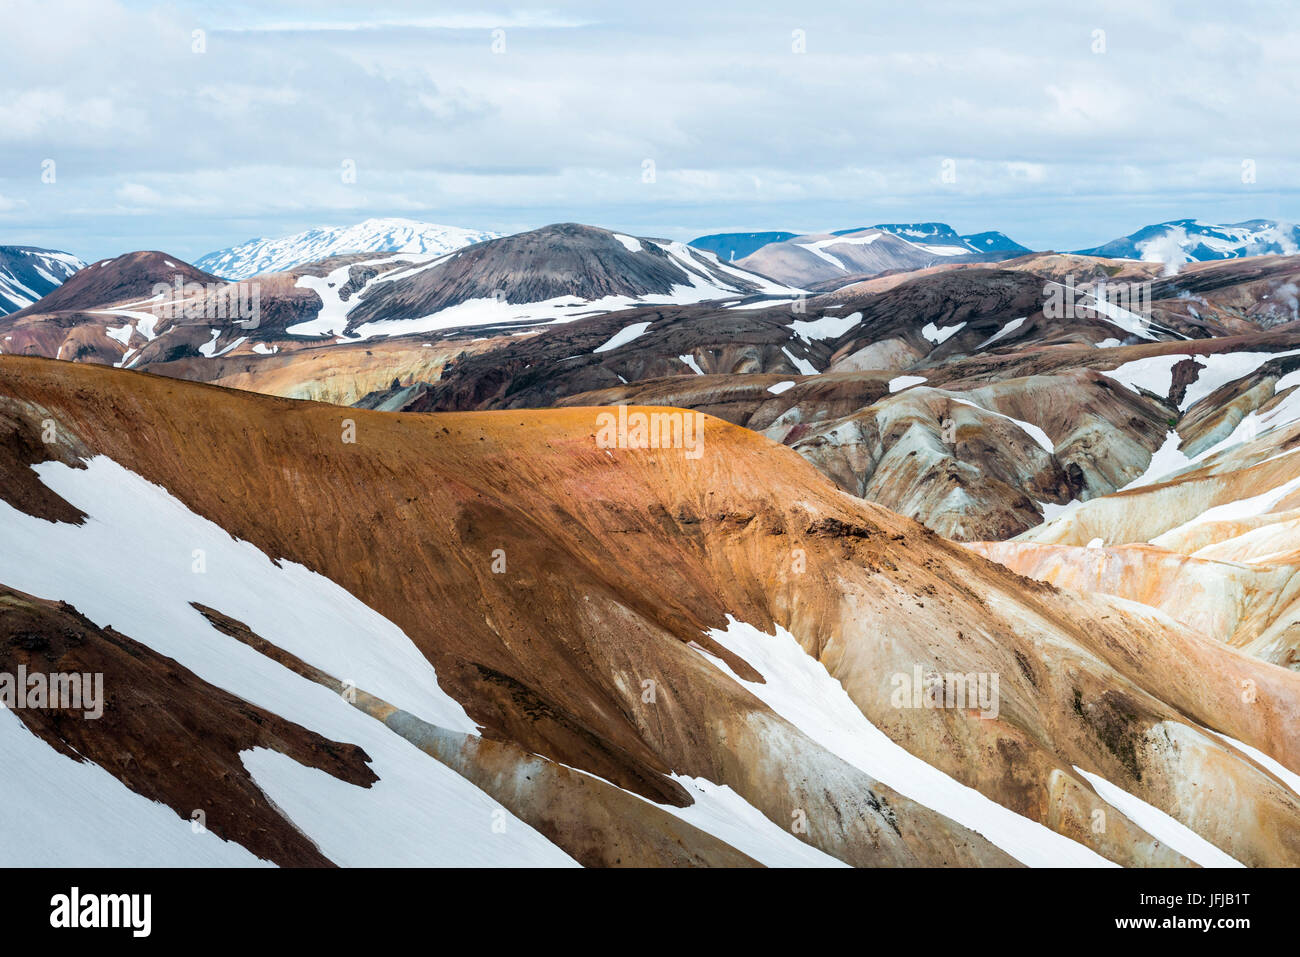 The immense colours' contrast in Landmannalaugar, Iceland Stock Photo